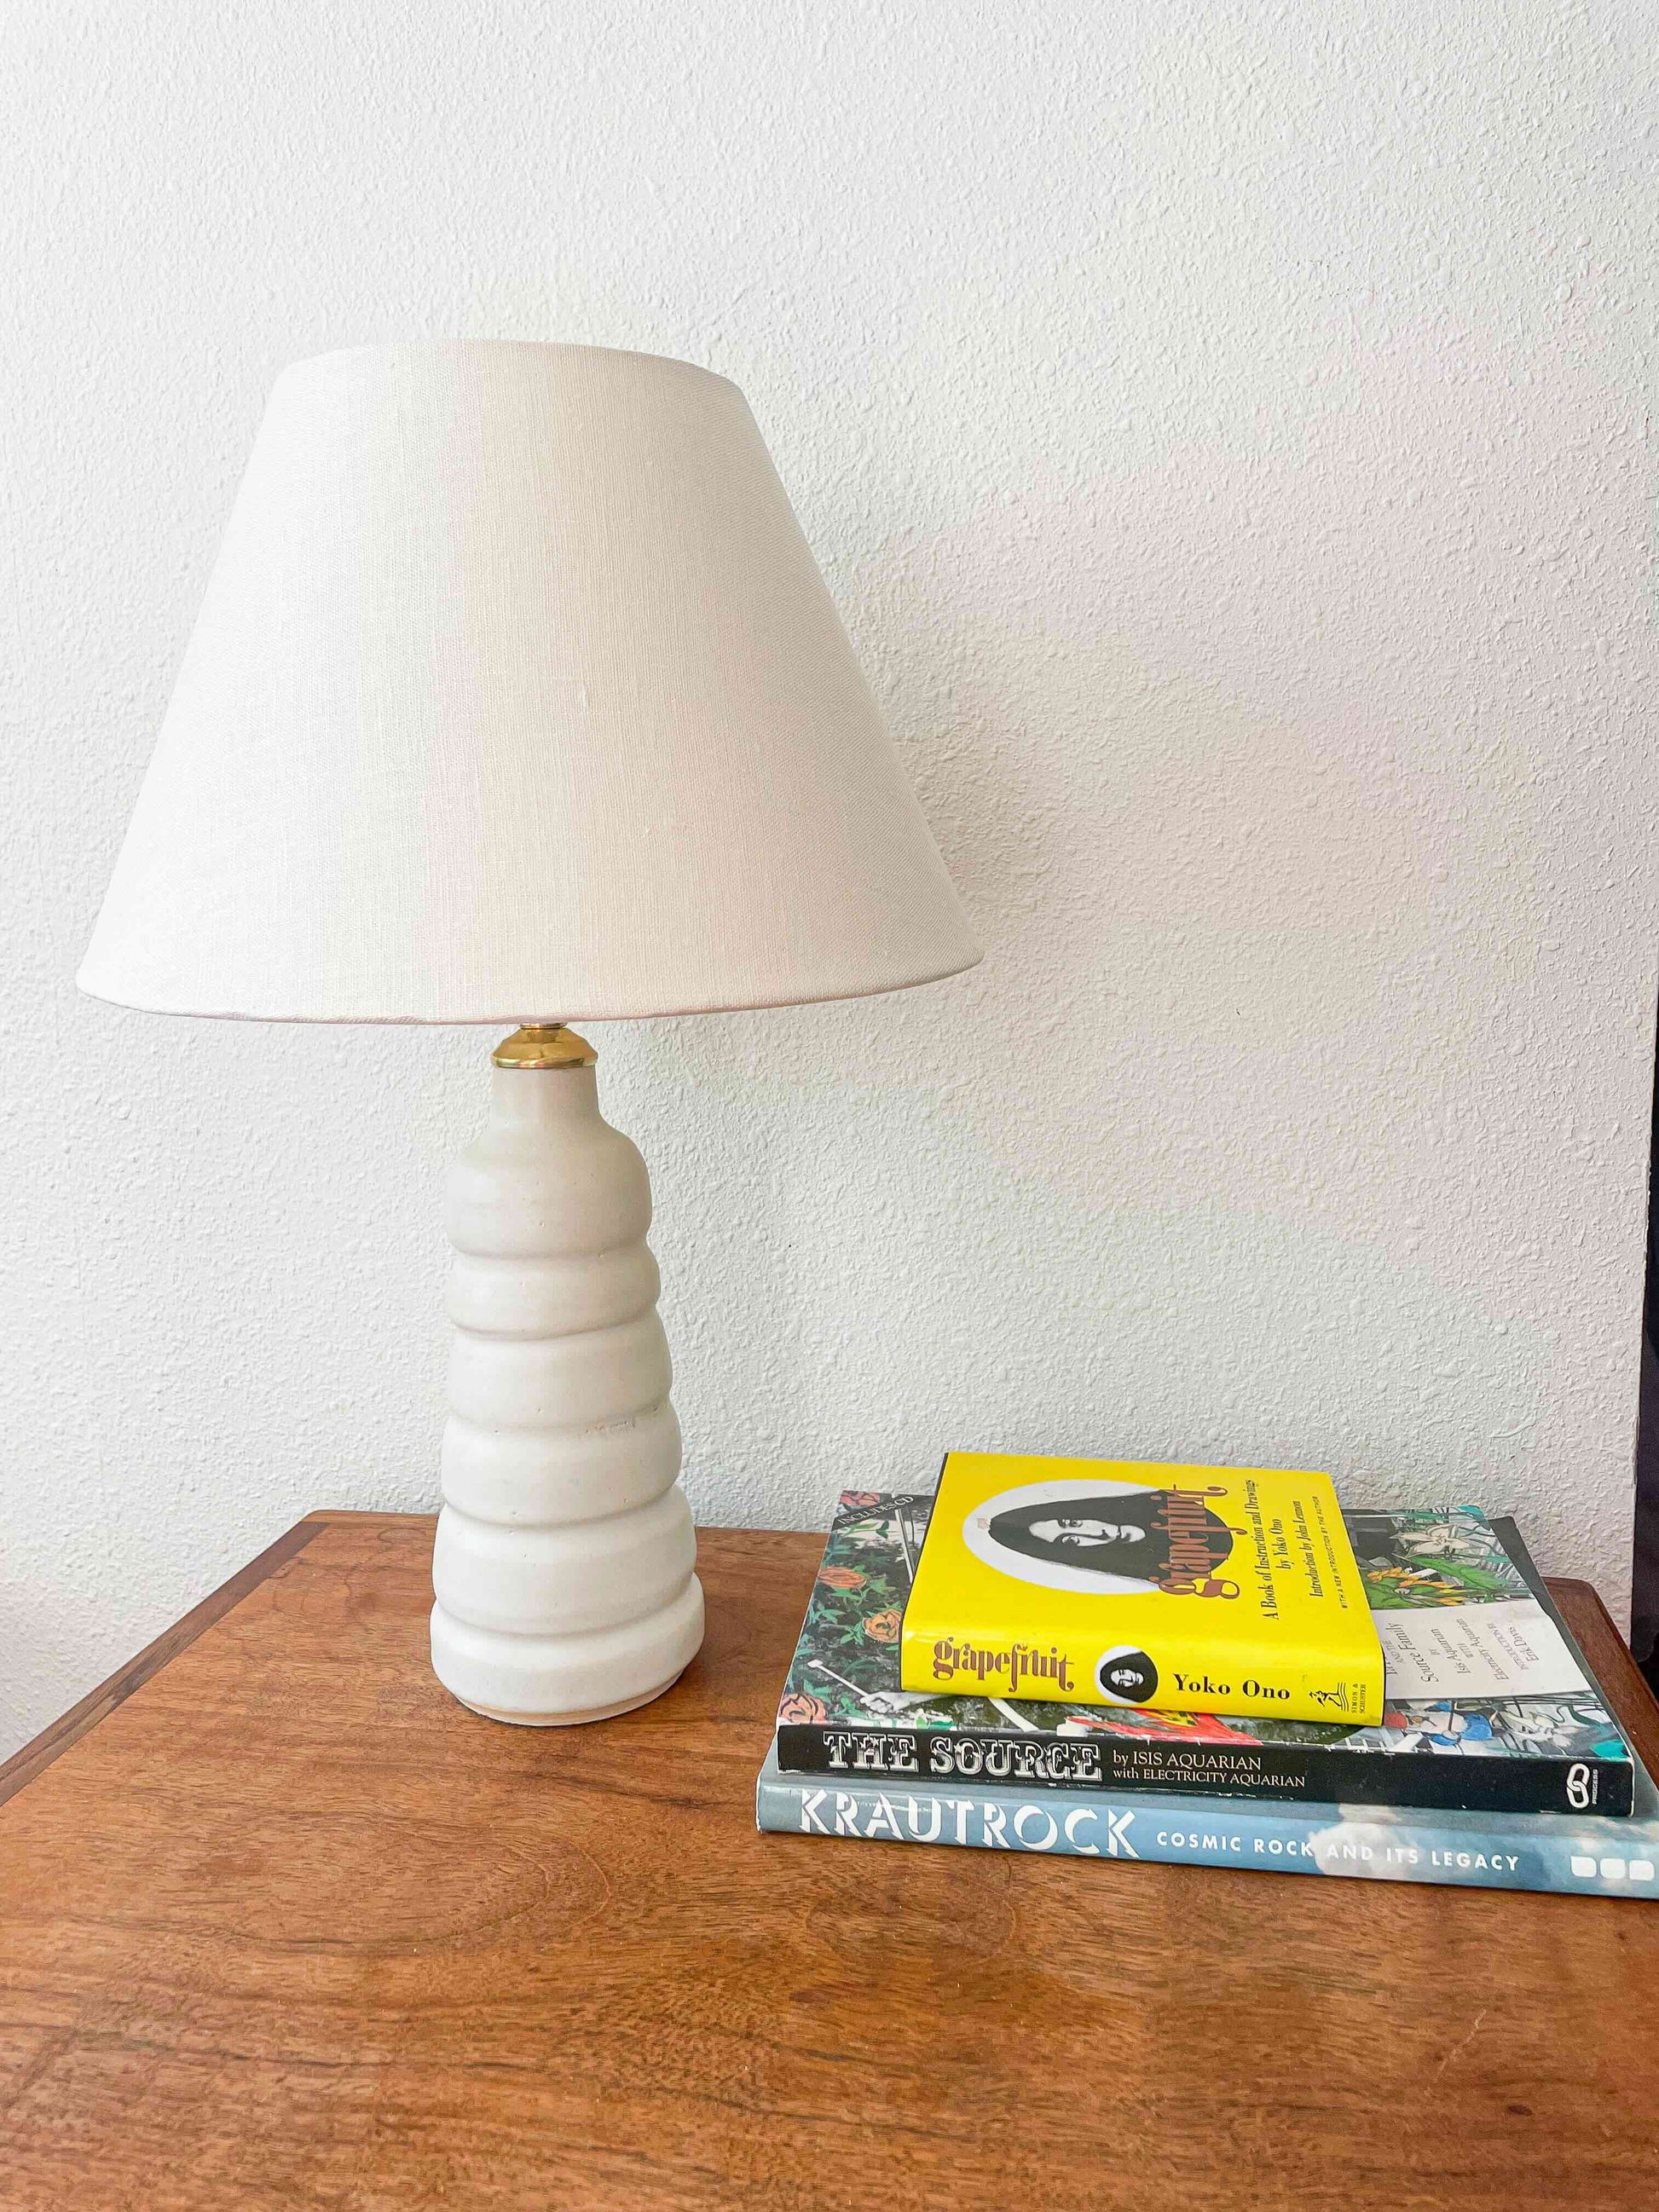 Wheel-thrown ribbed lamp with matte off-white glaze. Made by Hey Moon Ceramics. Comes with linen coolie style shade. Has brass finishes